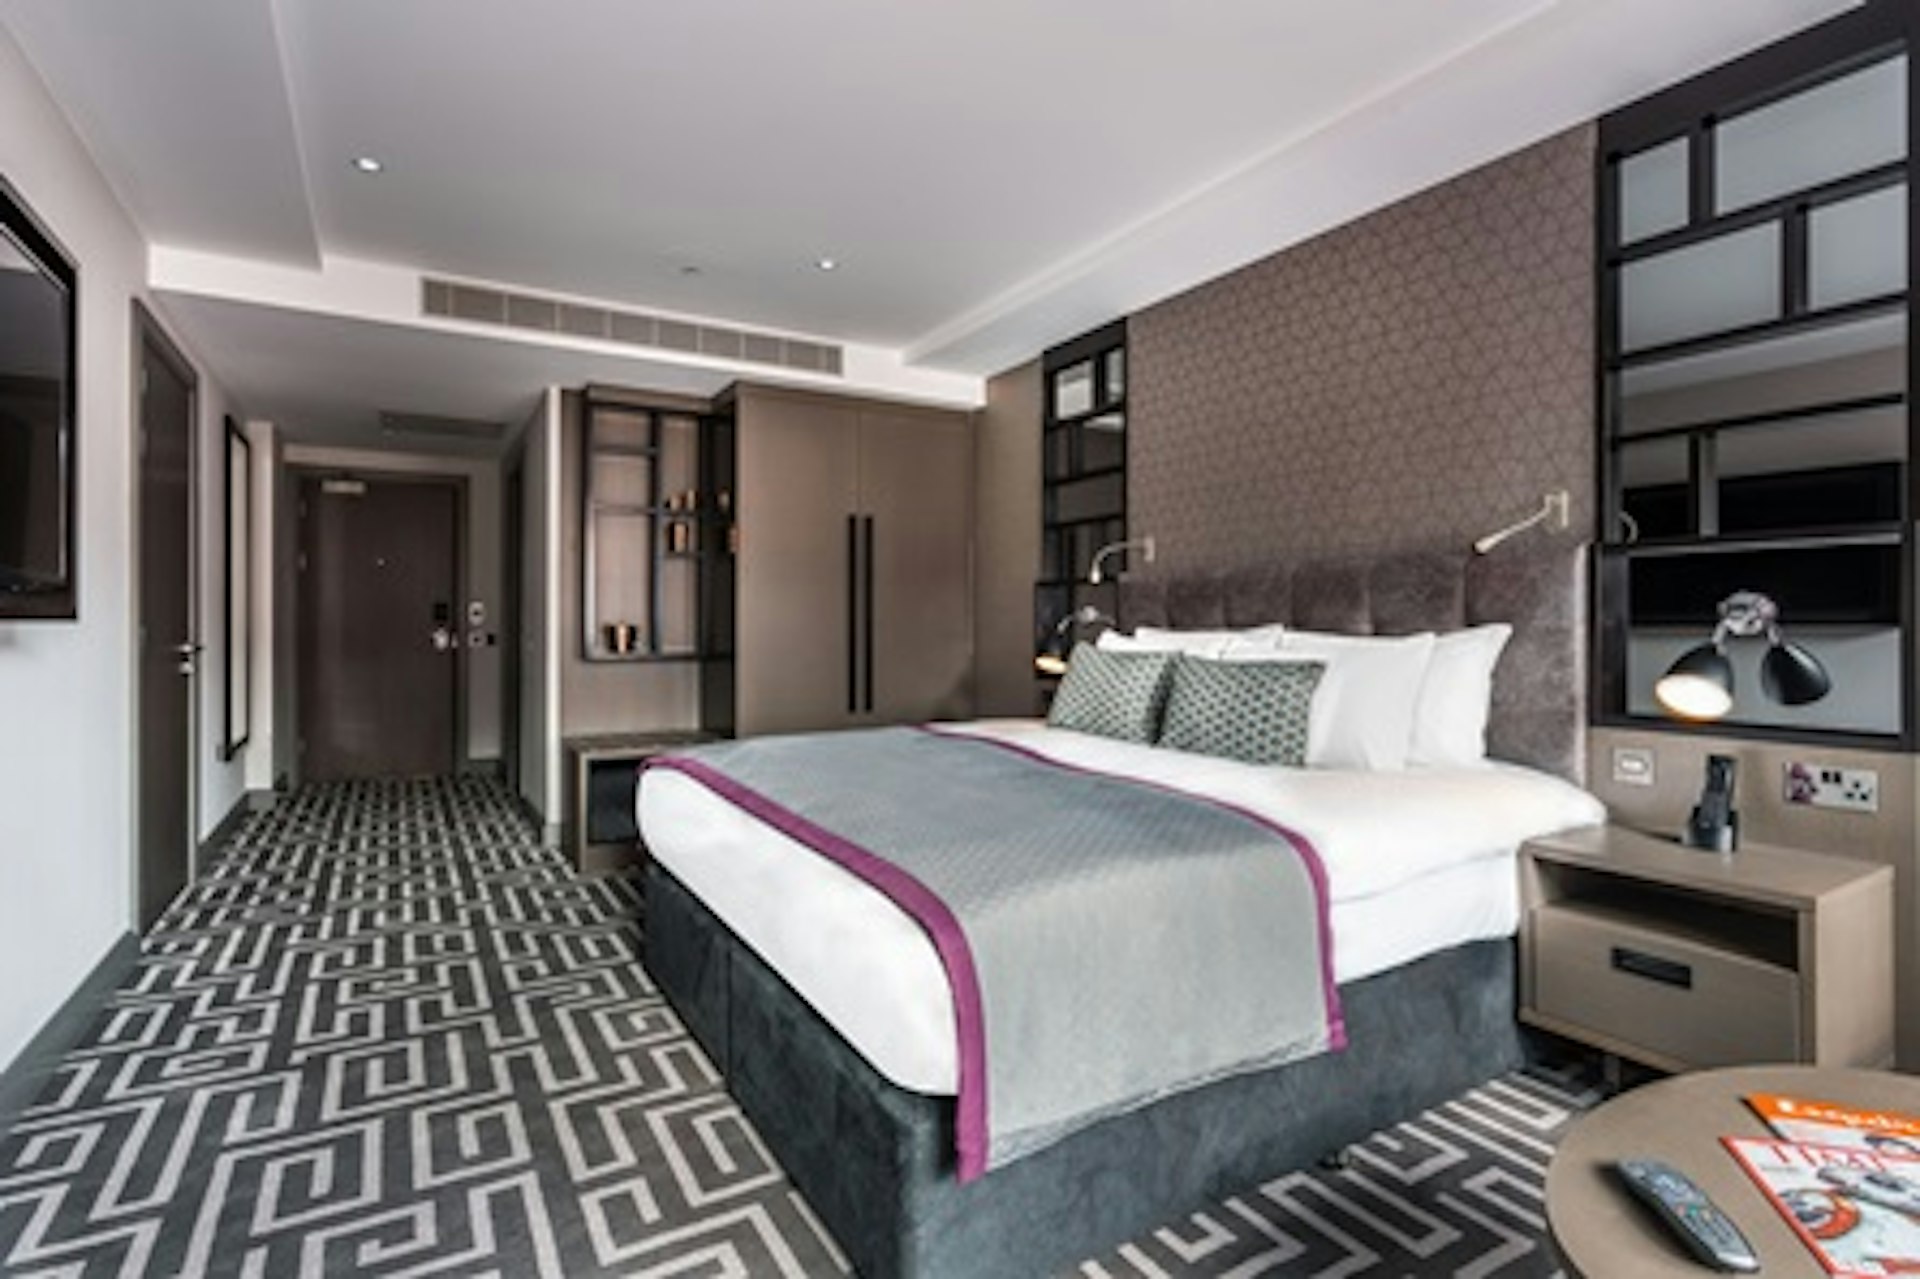 One Night London Break with Champagne for Two at the 5* Courthouse Hotel, Shoreditch 2